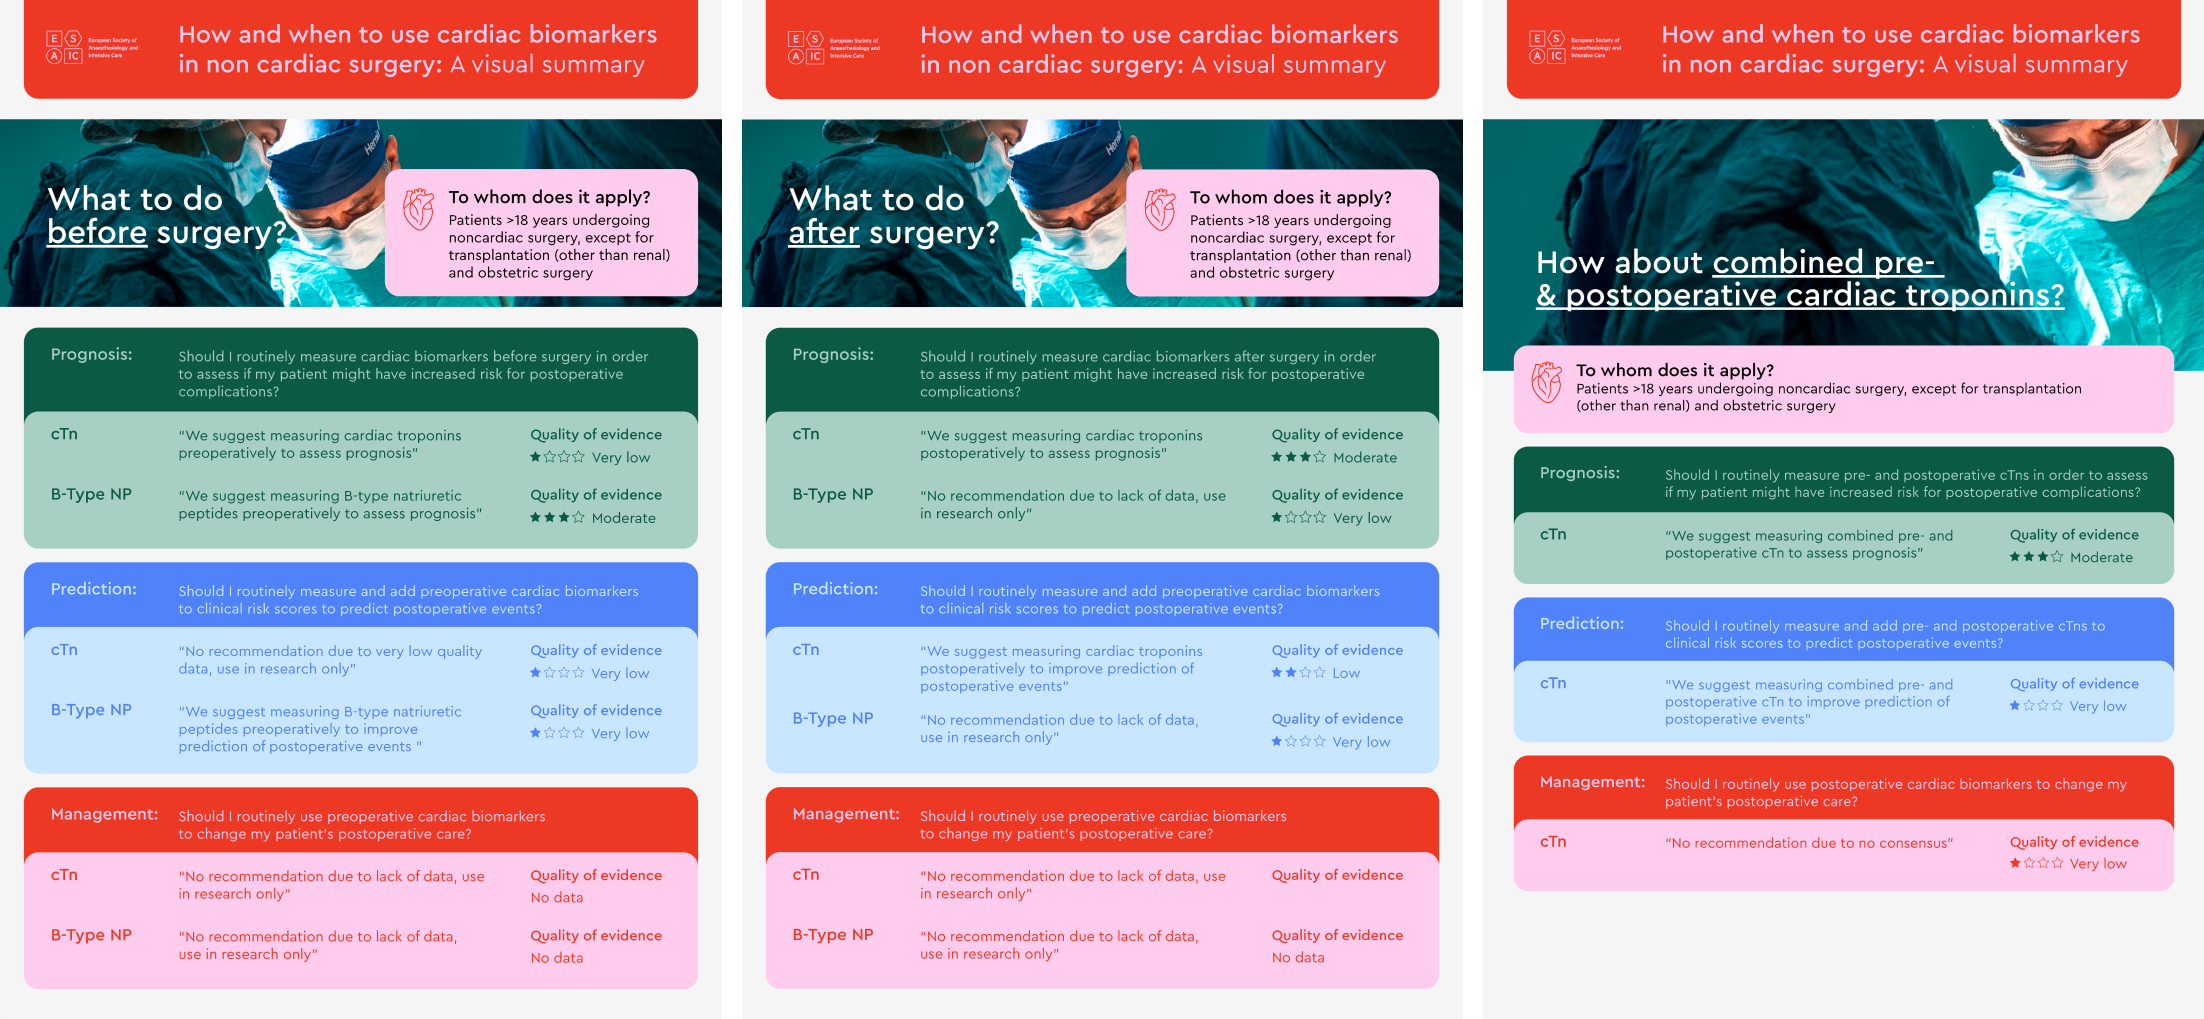 biomarker-guidelines-infographic-1